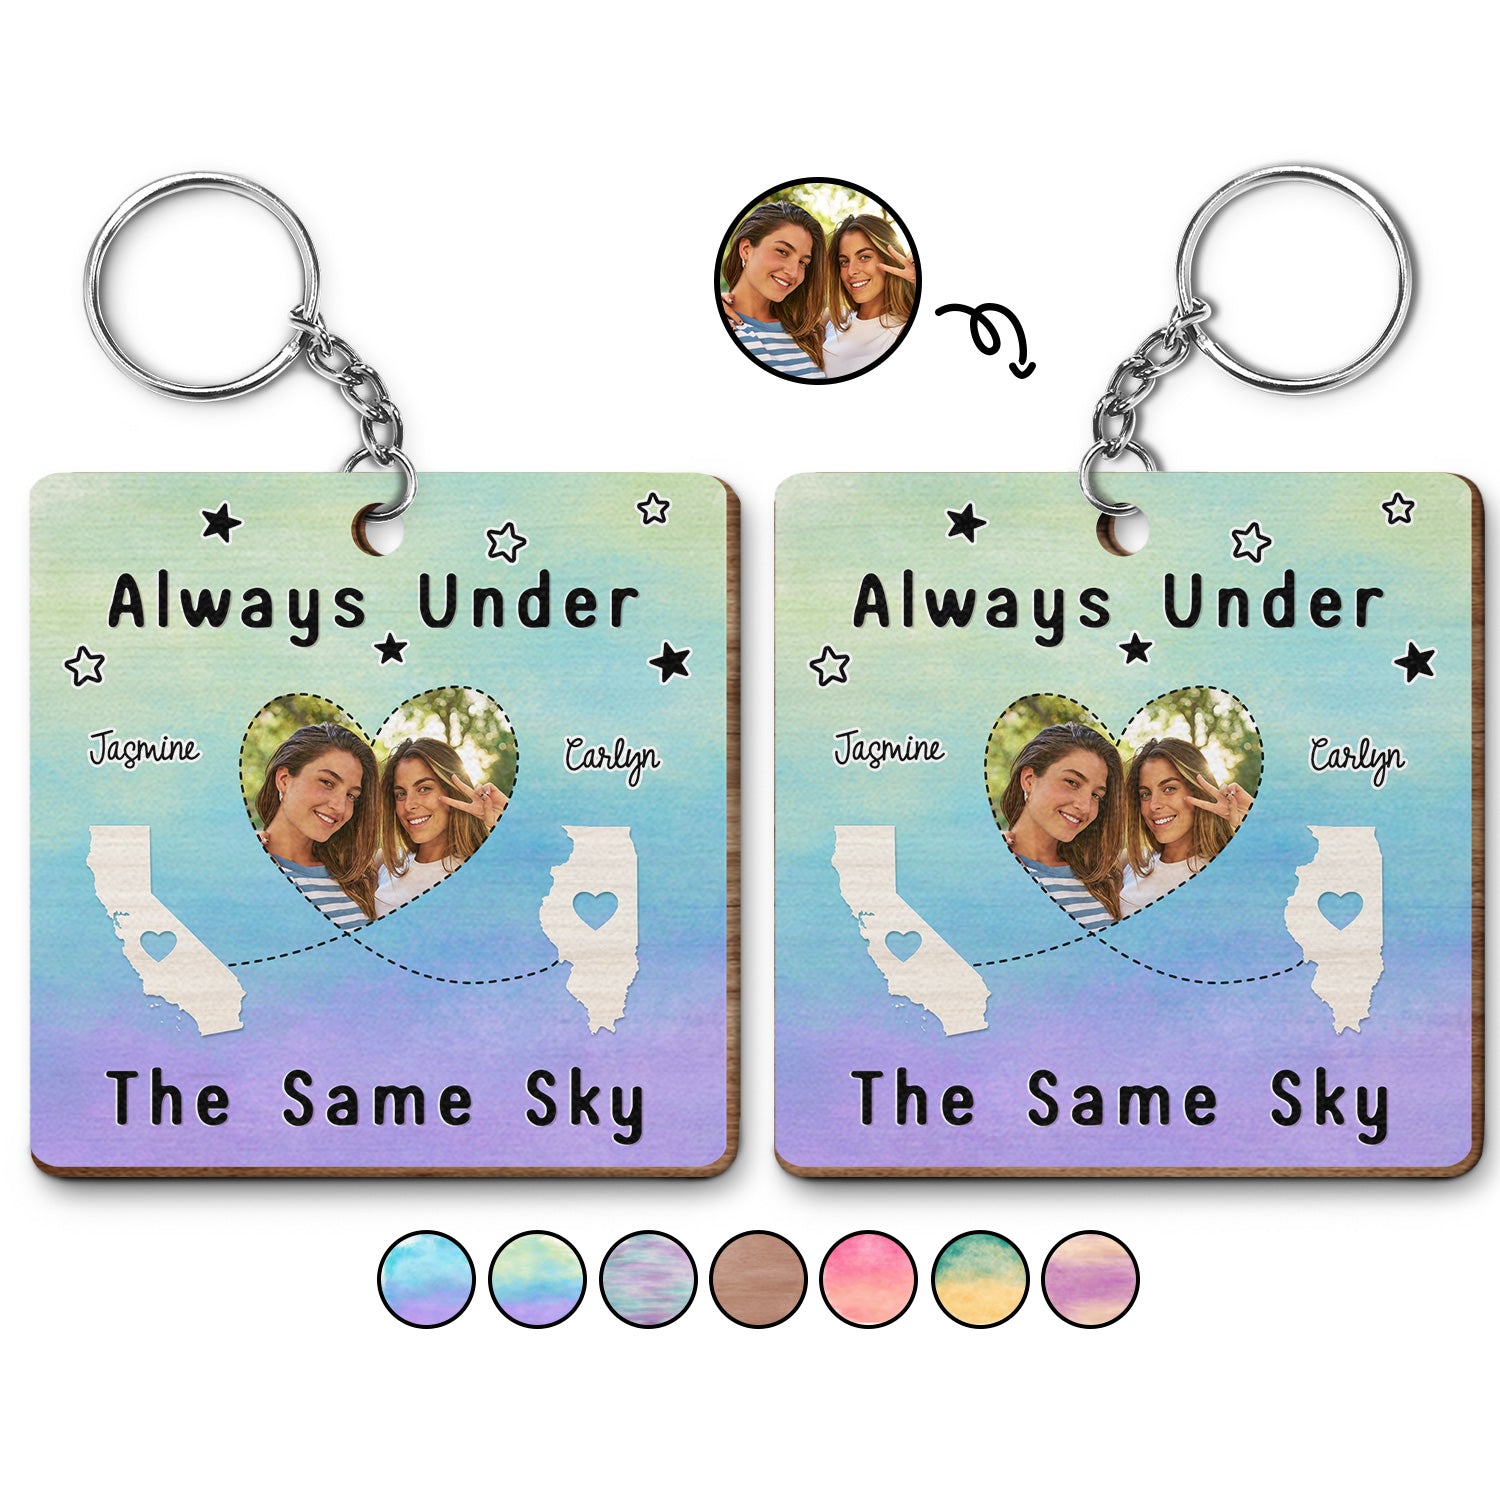 Custom Photo Always Under The Same Sky - Gift For BFF Best Friends, Besties, Siblings, Family - Personalized Wooden Keychain